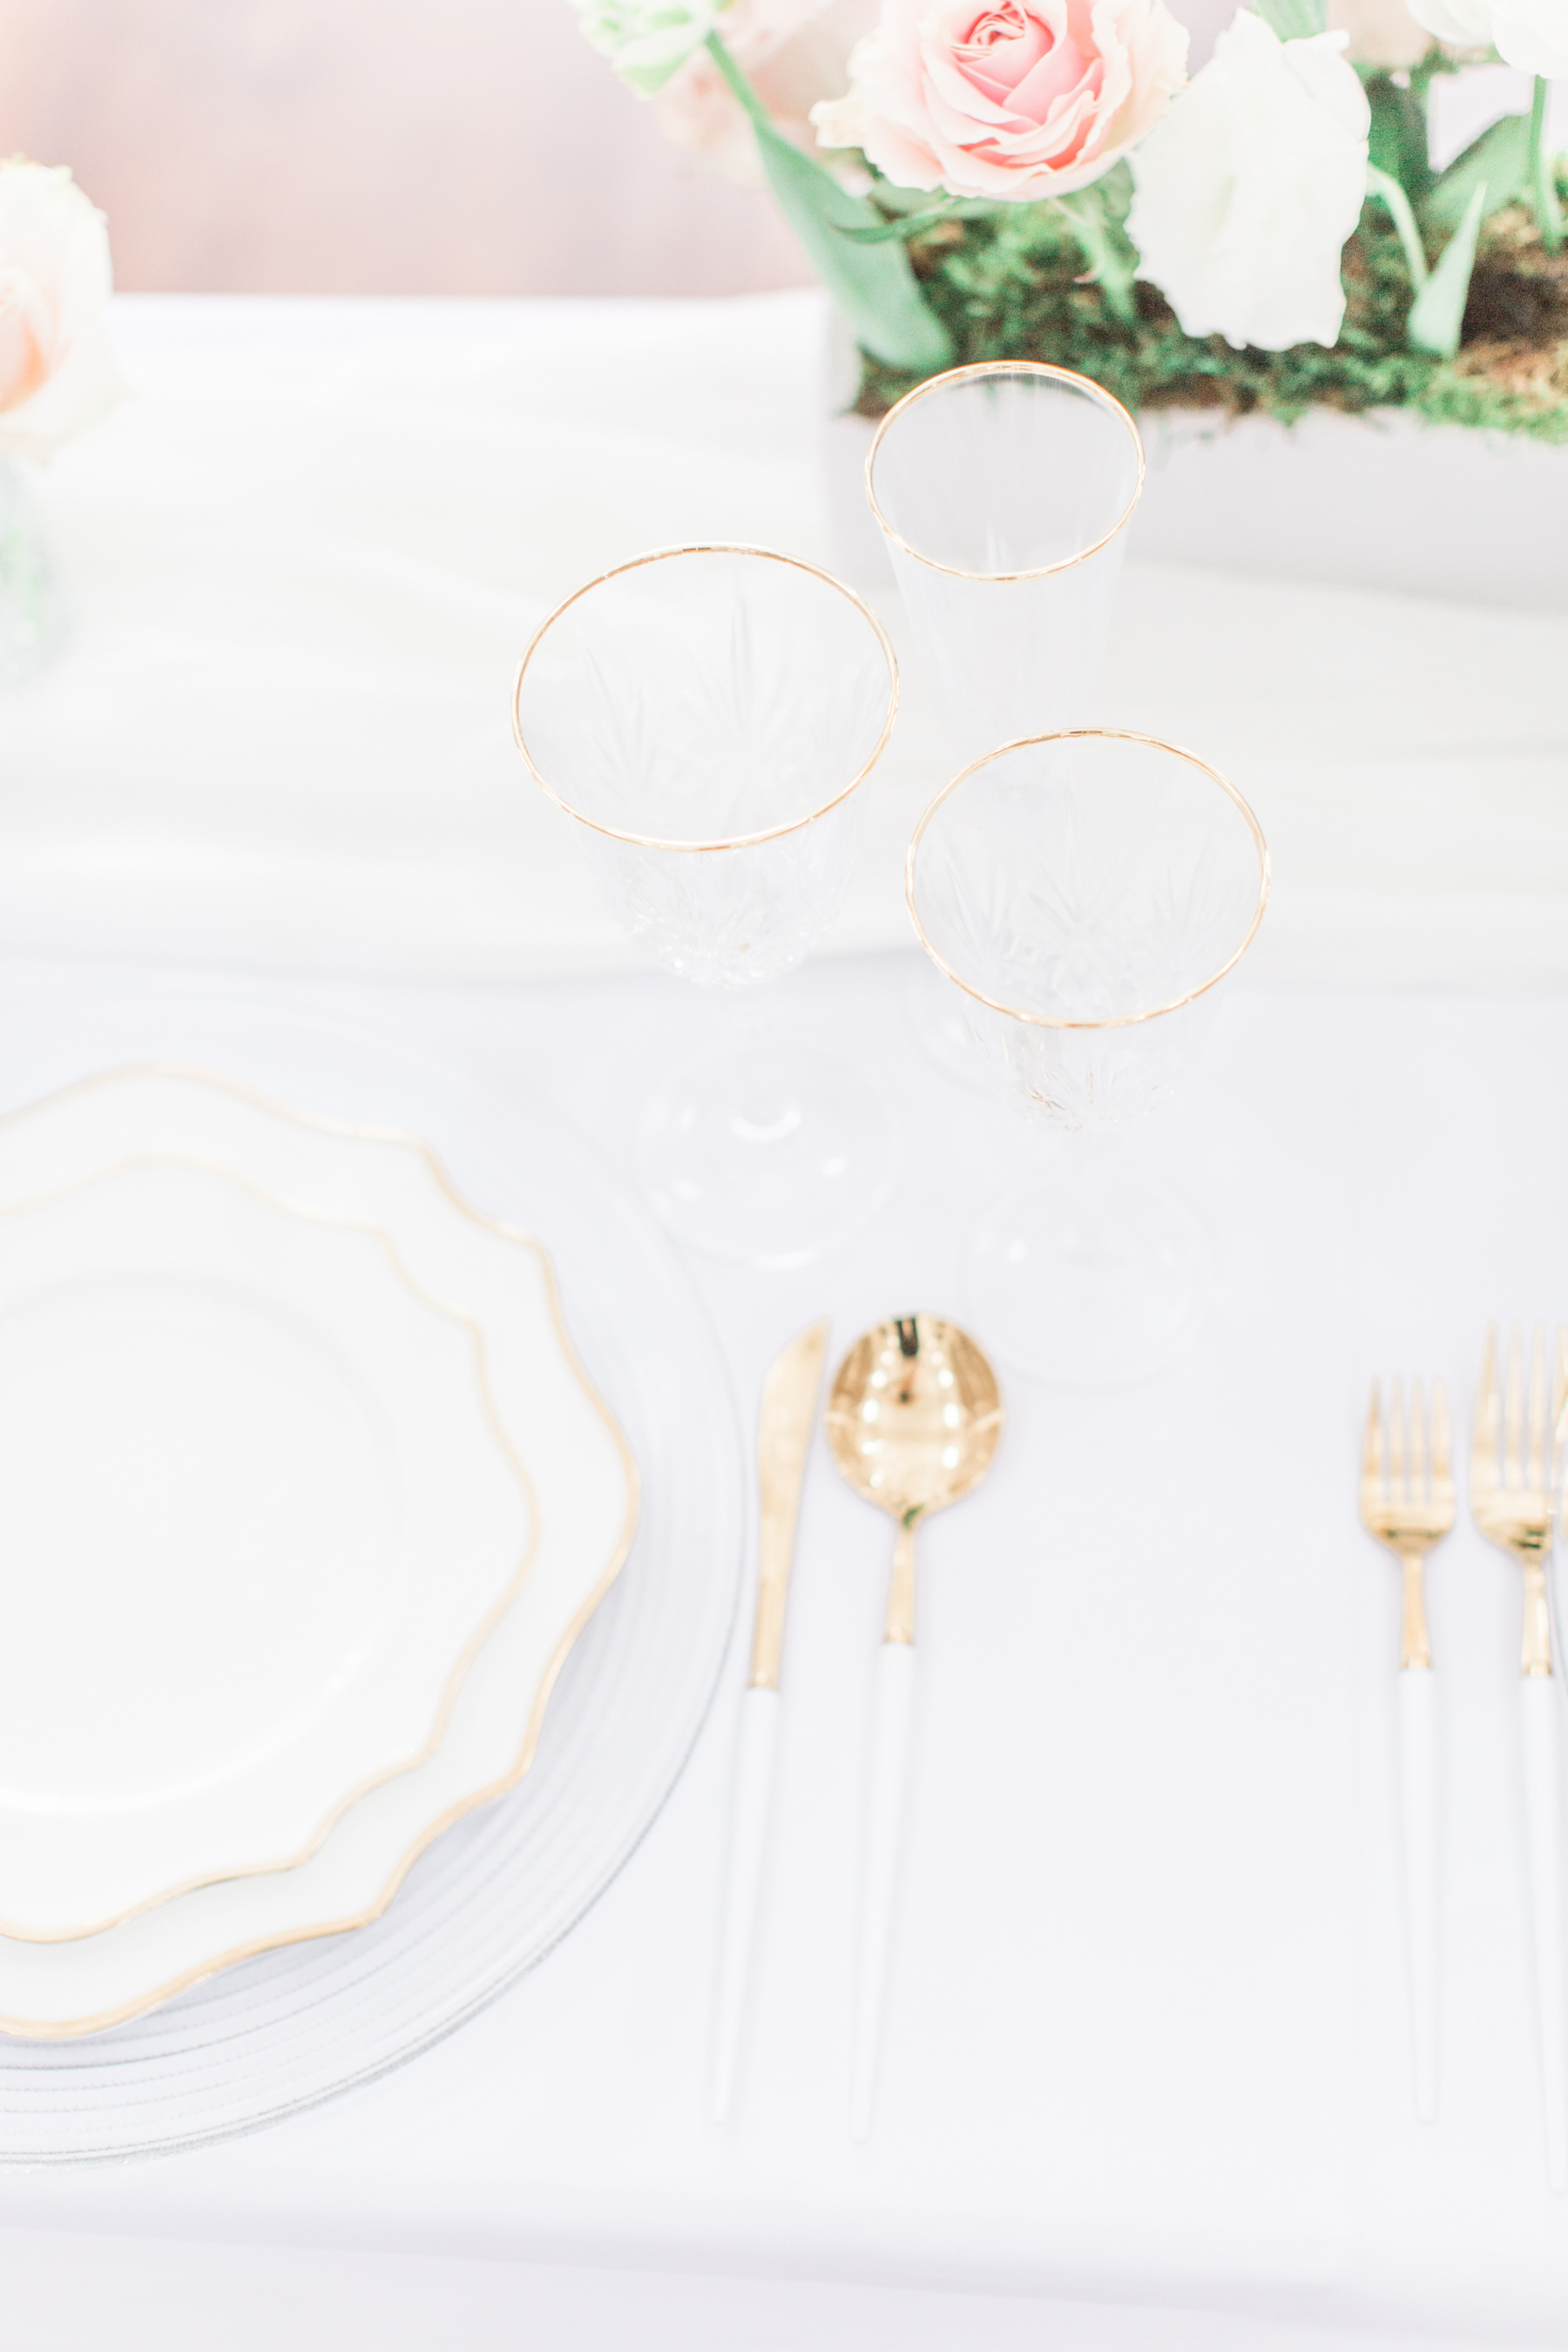 White and gold wedding table decor